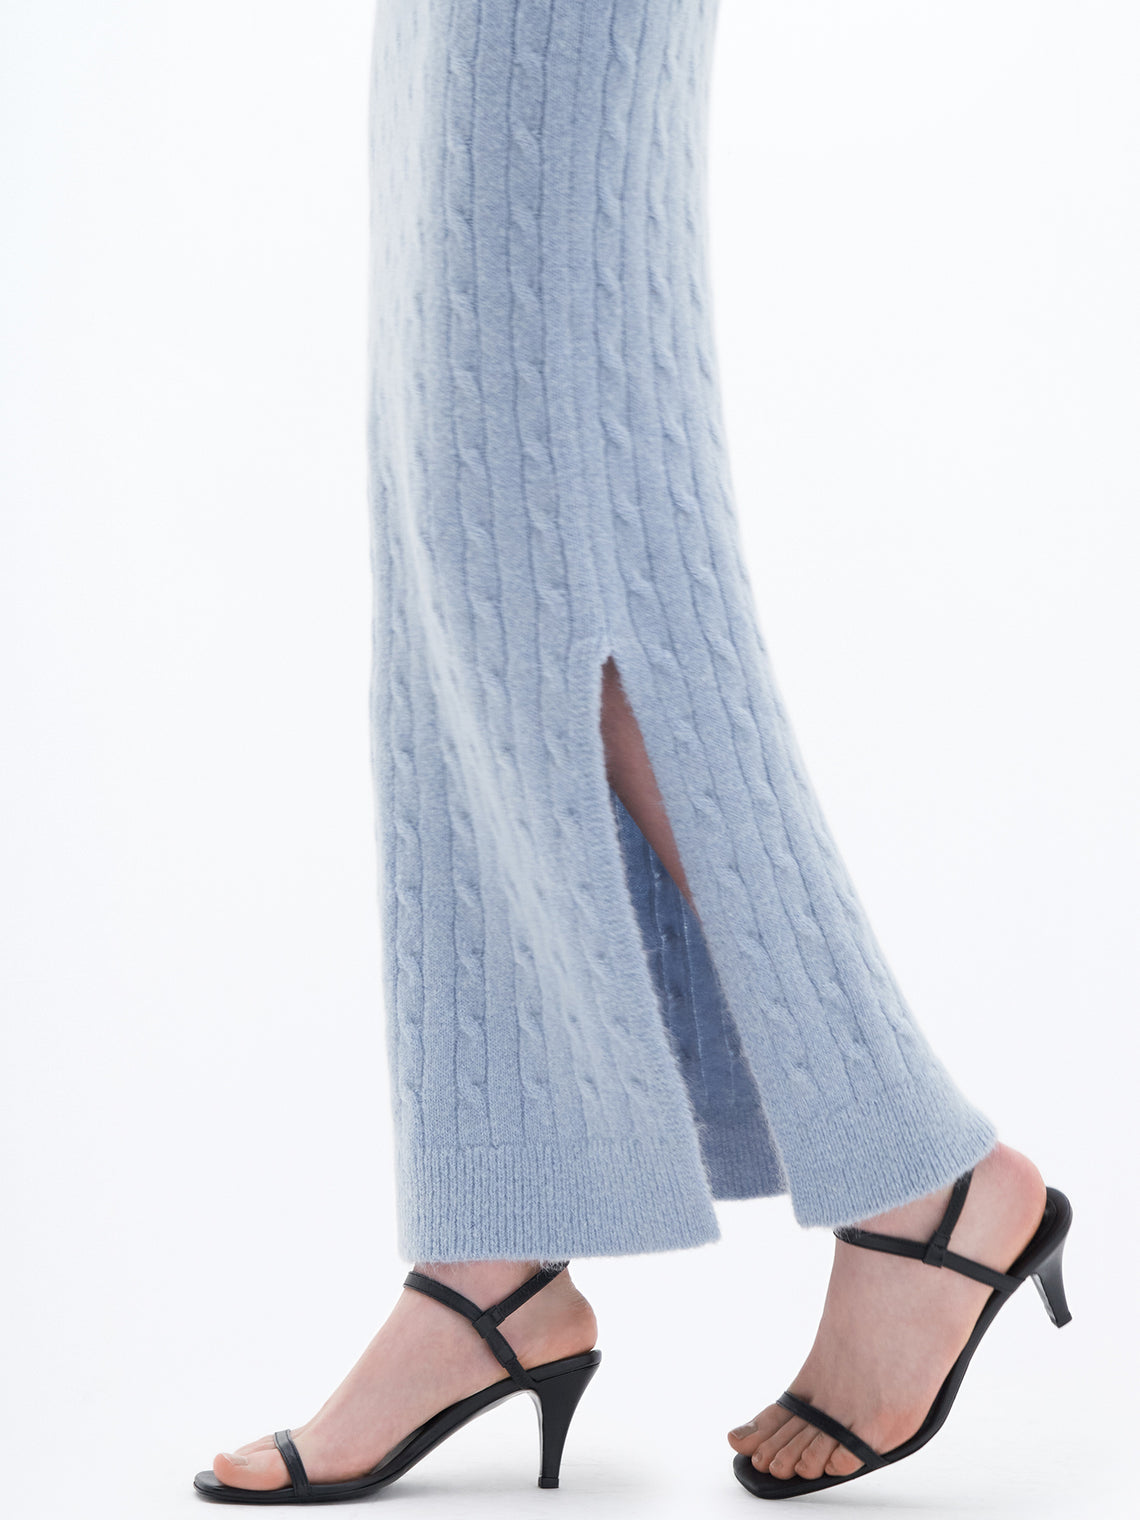 Braided mohair knit skirt by Filippa K in ice blue